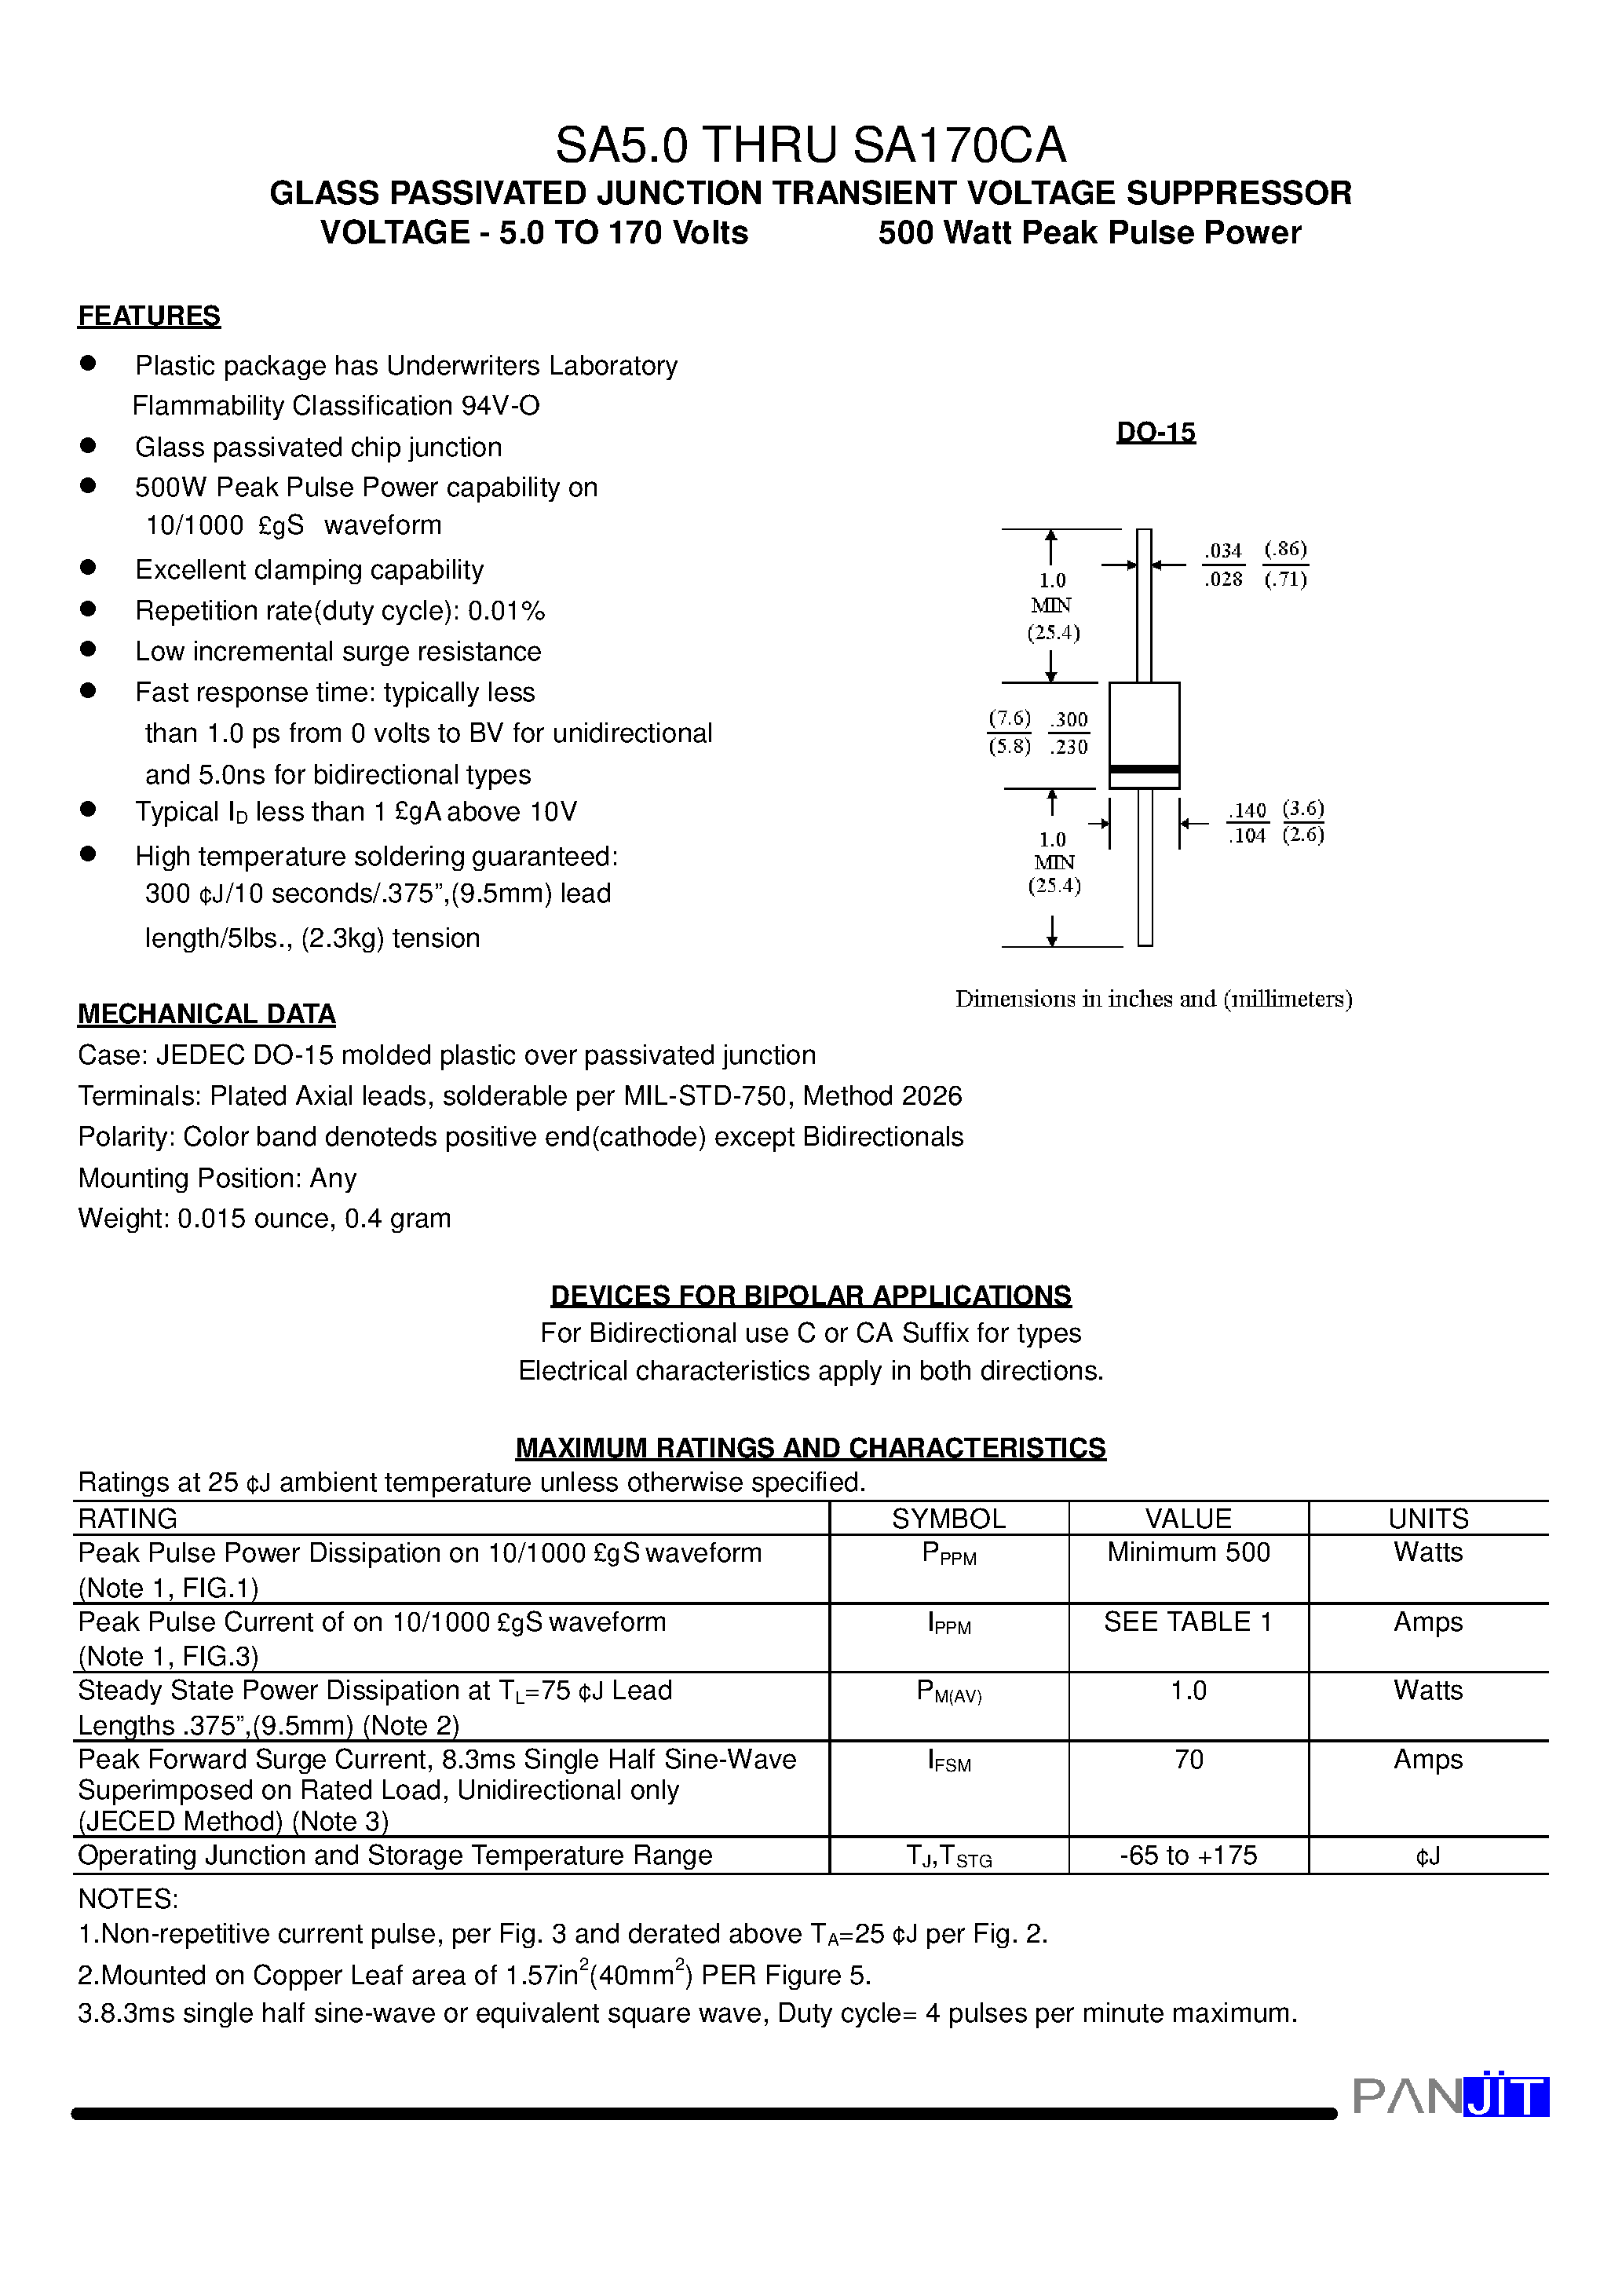 Datasheet SA26A - GLASS PASSIVATED JUNCTION TRANSIENT VOLTAGE SUPPRESSOR(VOLTAGE - 5.0 TO 170 Volts 500 Watt Peak Pulse Power) page 1